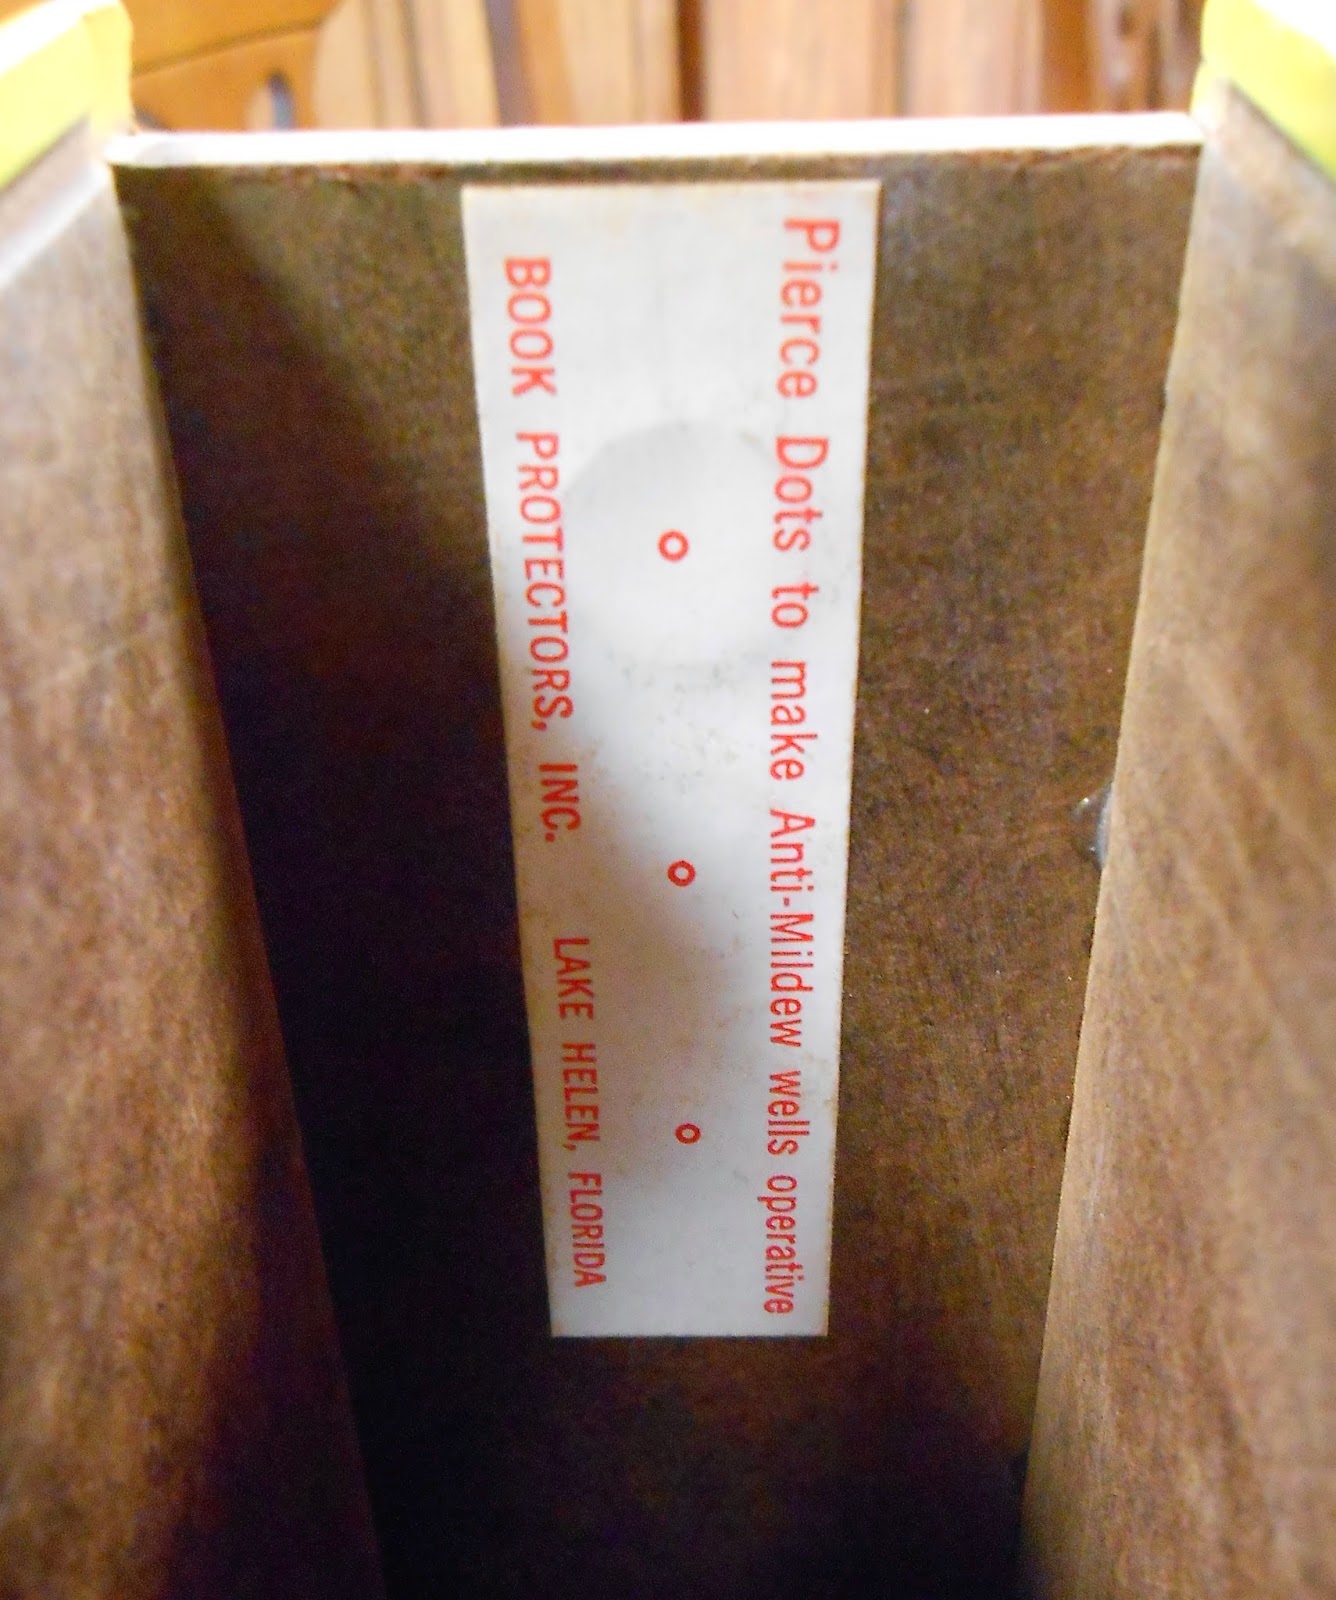 A tag inside the box, reading "Pierce dots to make anti-mildew wells operative."